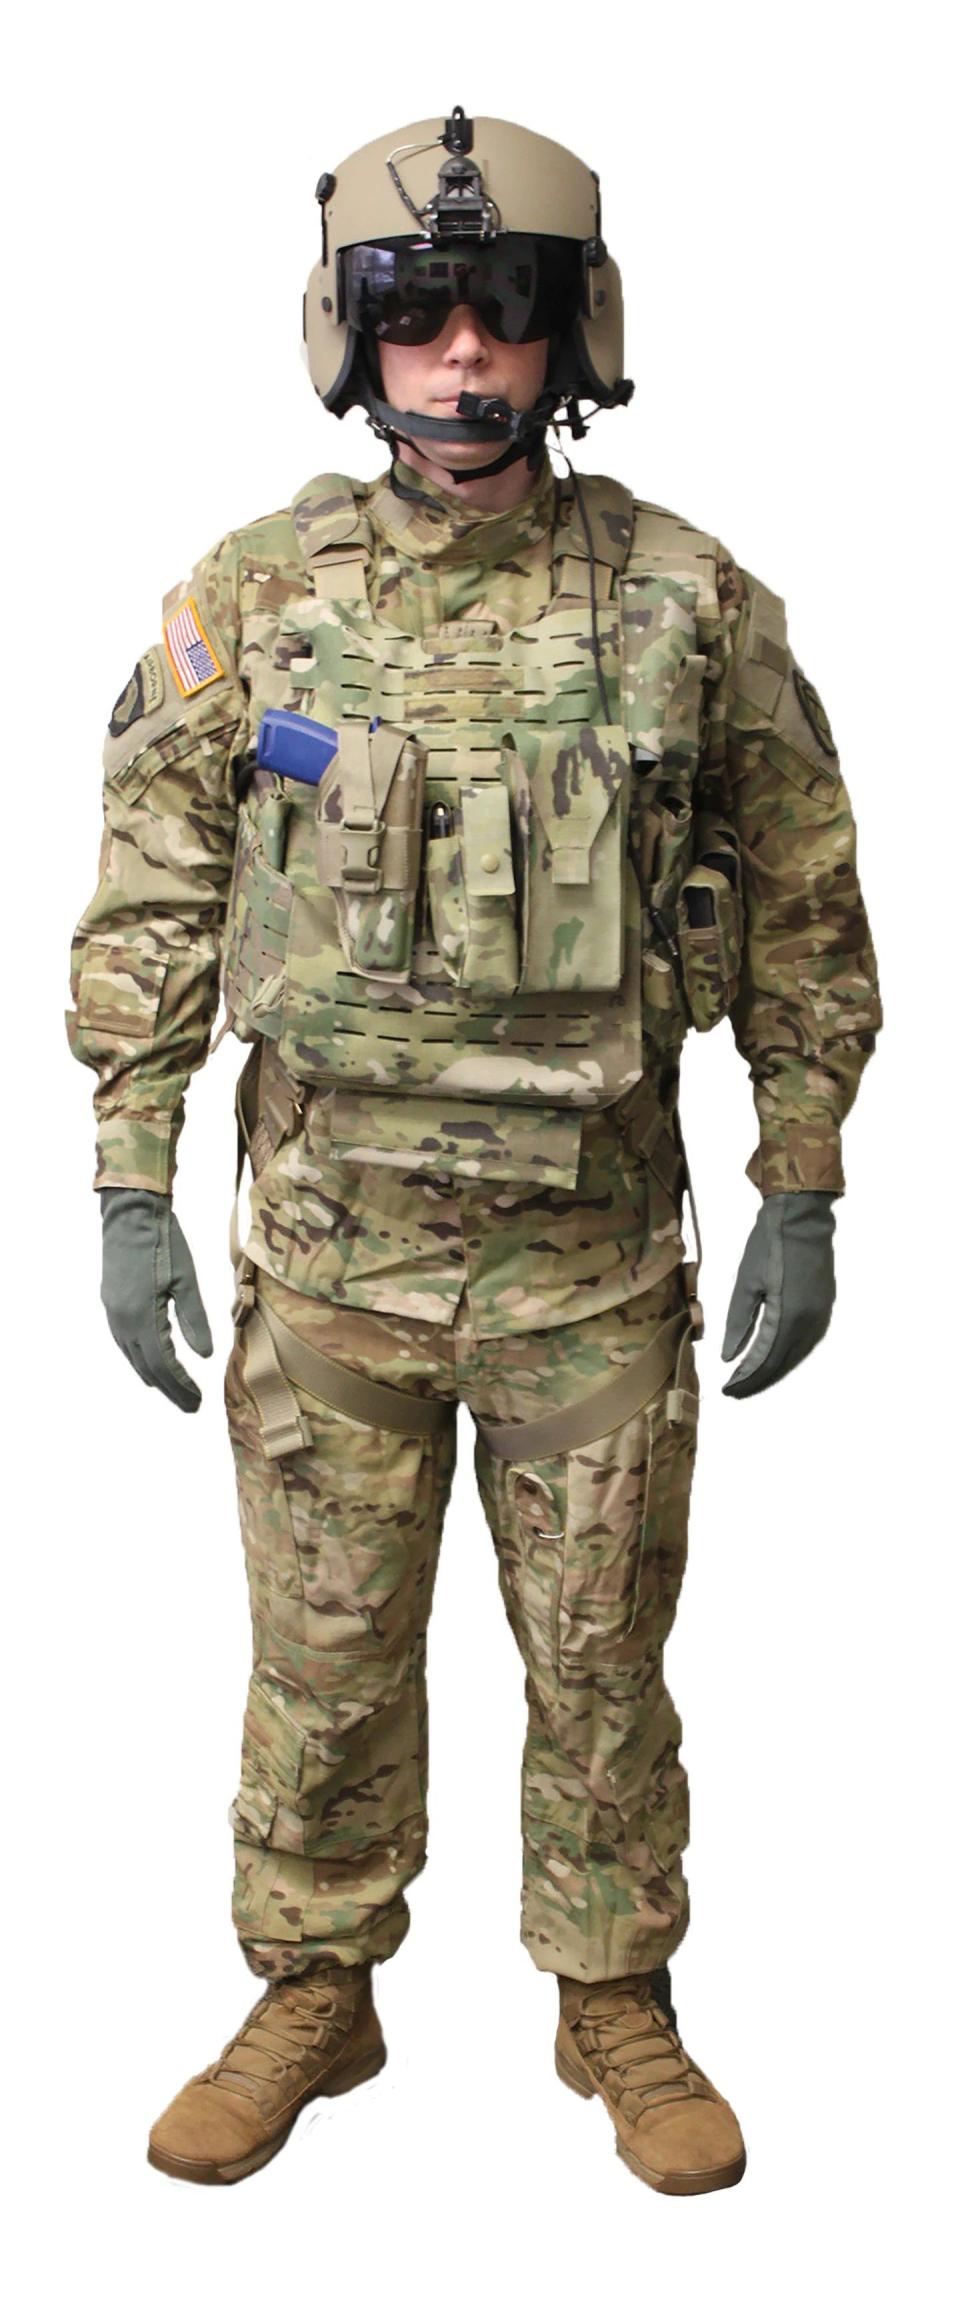 The newest version of aircrew gear has made modifications to the helmet, body armor and load carriage, as well as changed the placement of the flotation system. (Army)